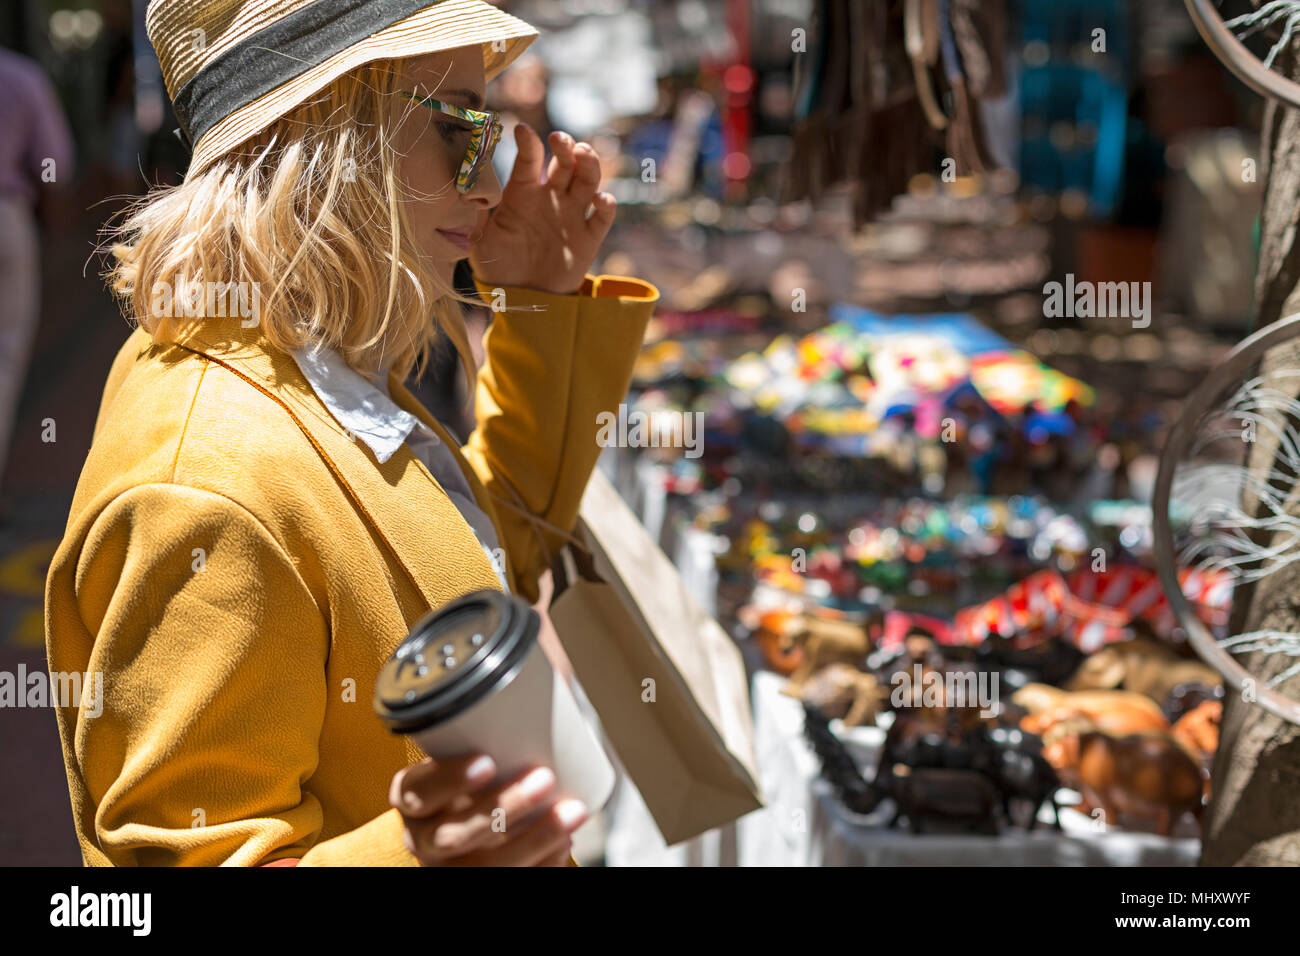 Woman at outdoor market stall, Cape Town, South Africa Stock Photo